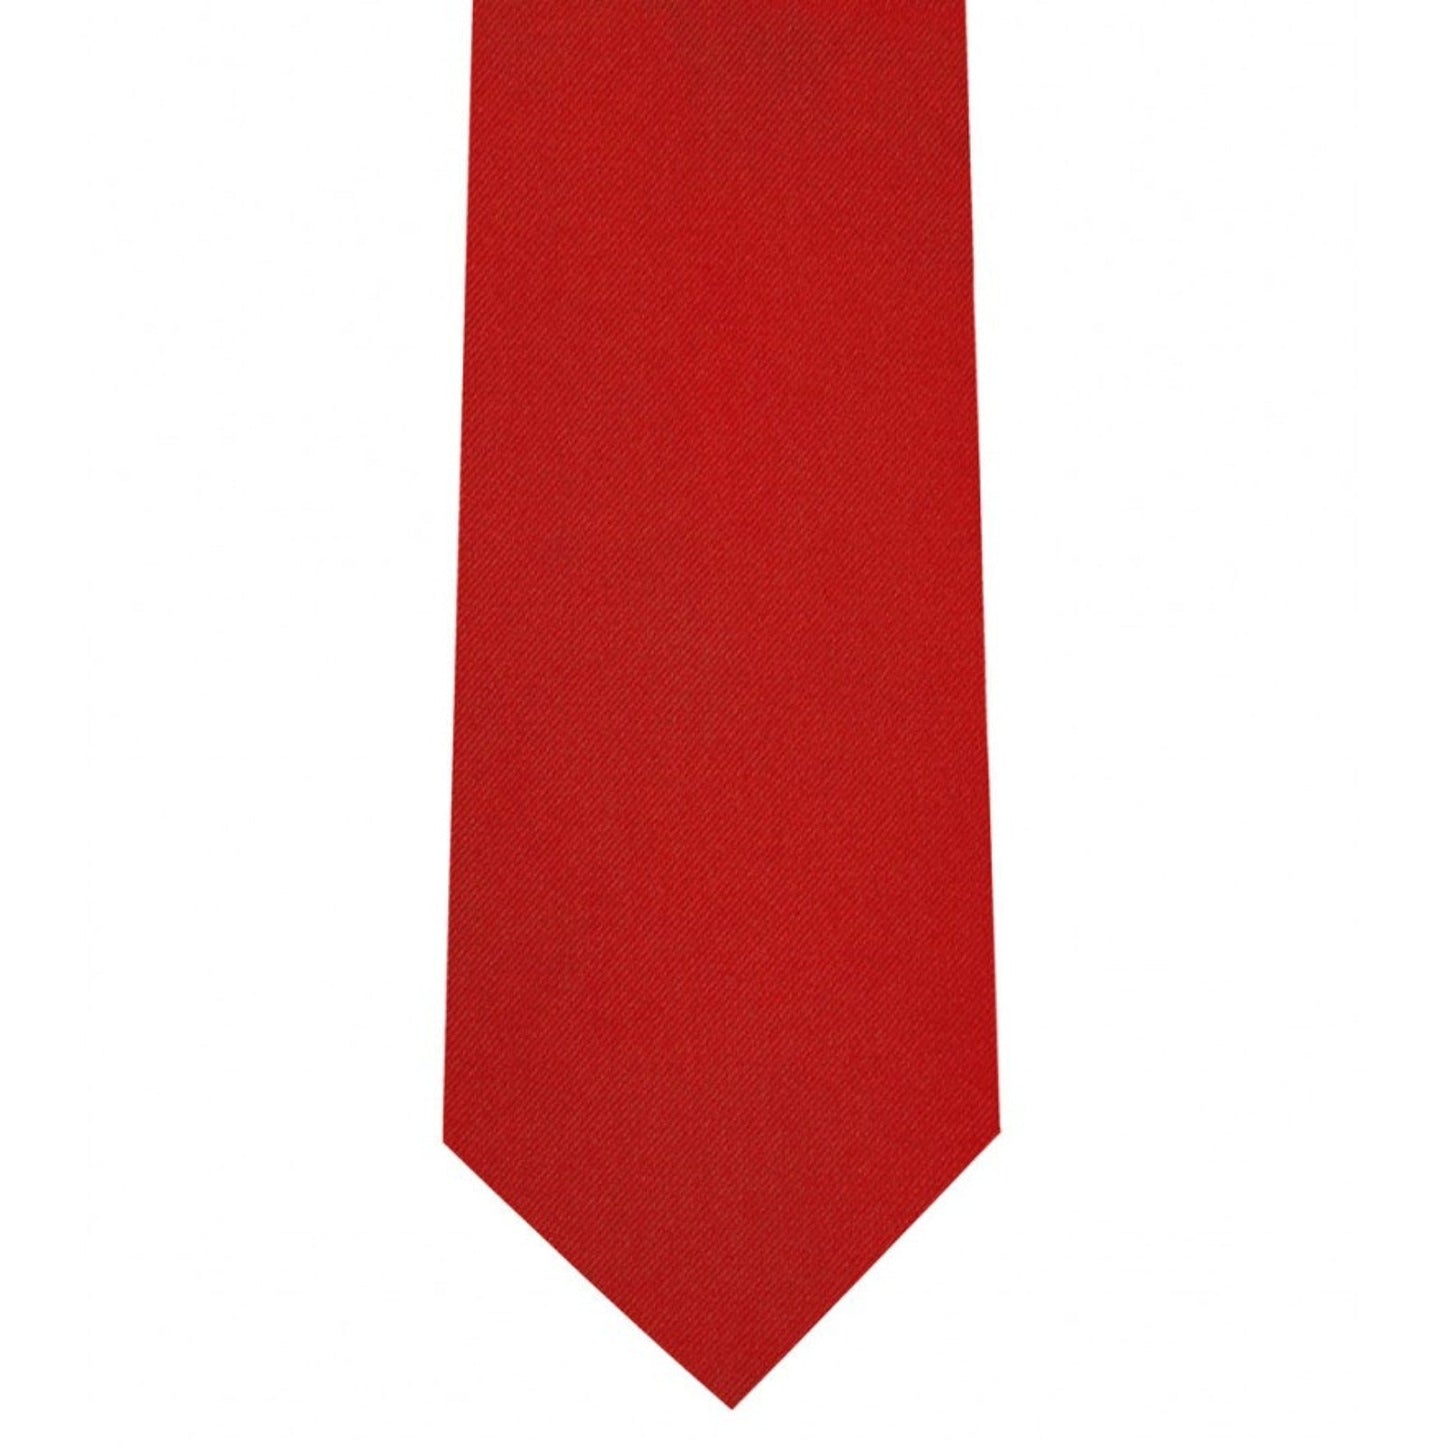 Classic True Red Tie Ultra Skinny tie width 2.25 inches With Matching Pocket Square | KCT Menswear